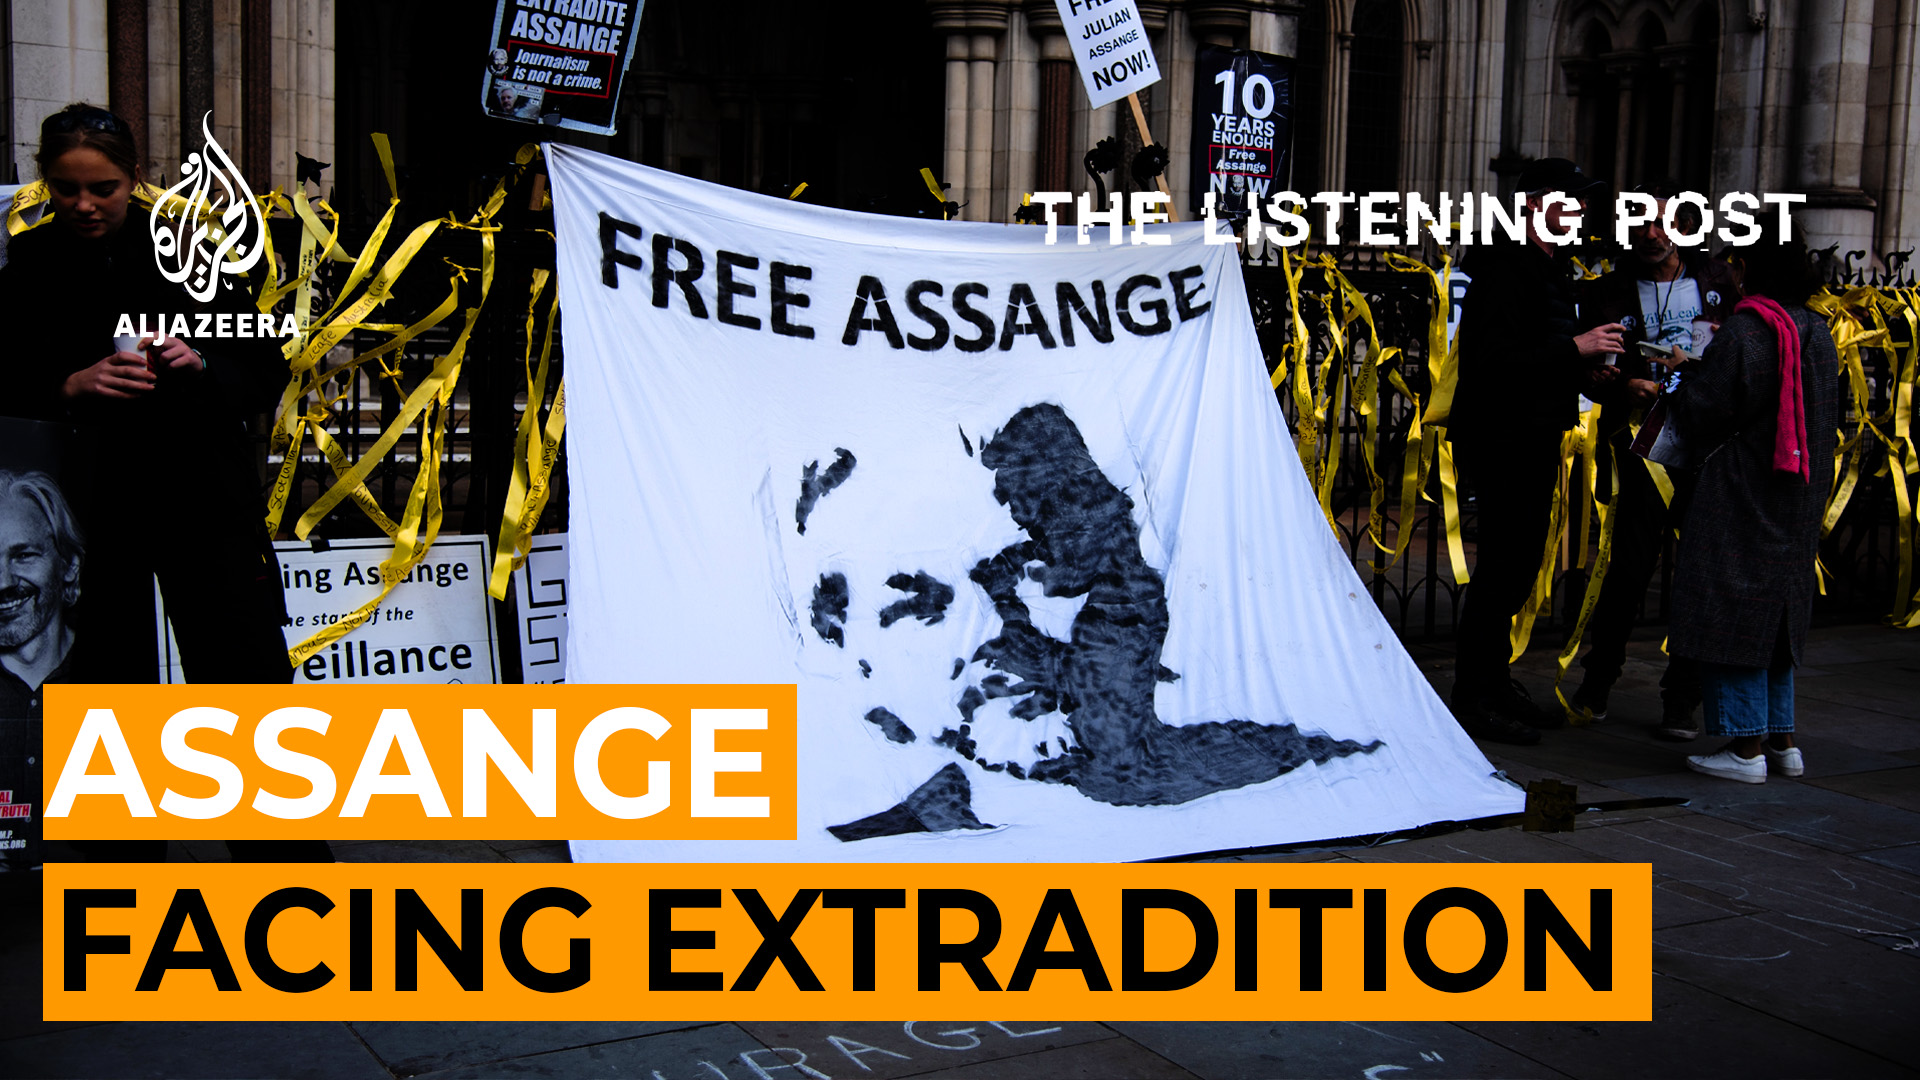 Julian Assange: The threat of extradition and politics behind it | The Listening Post